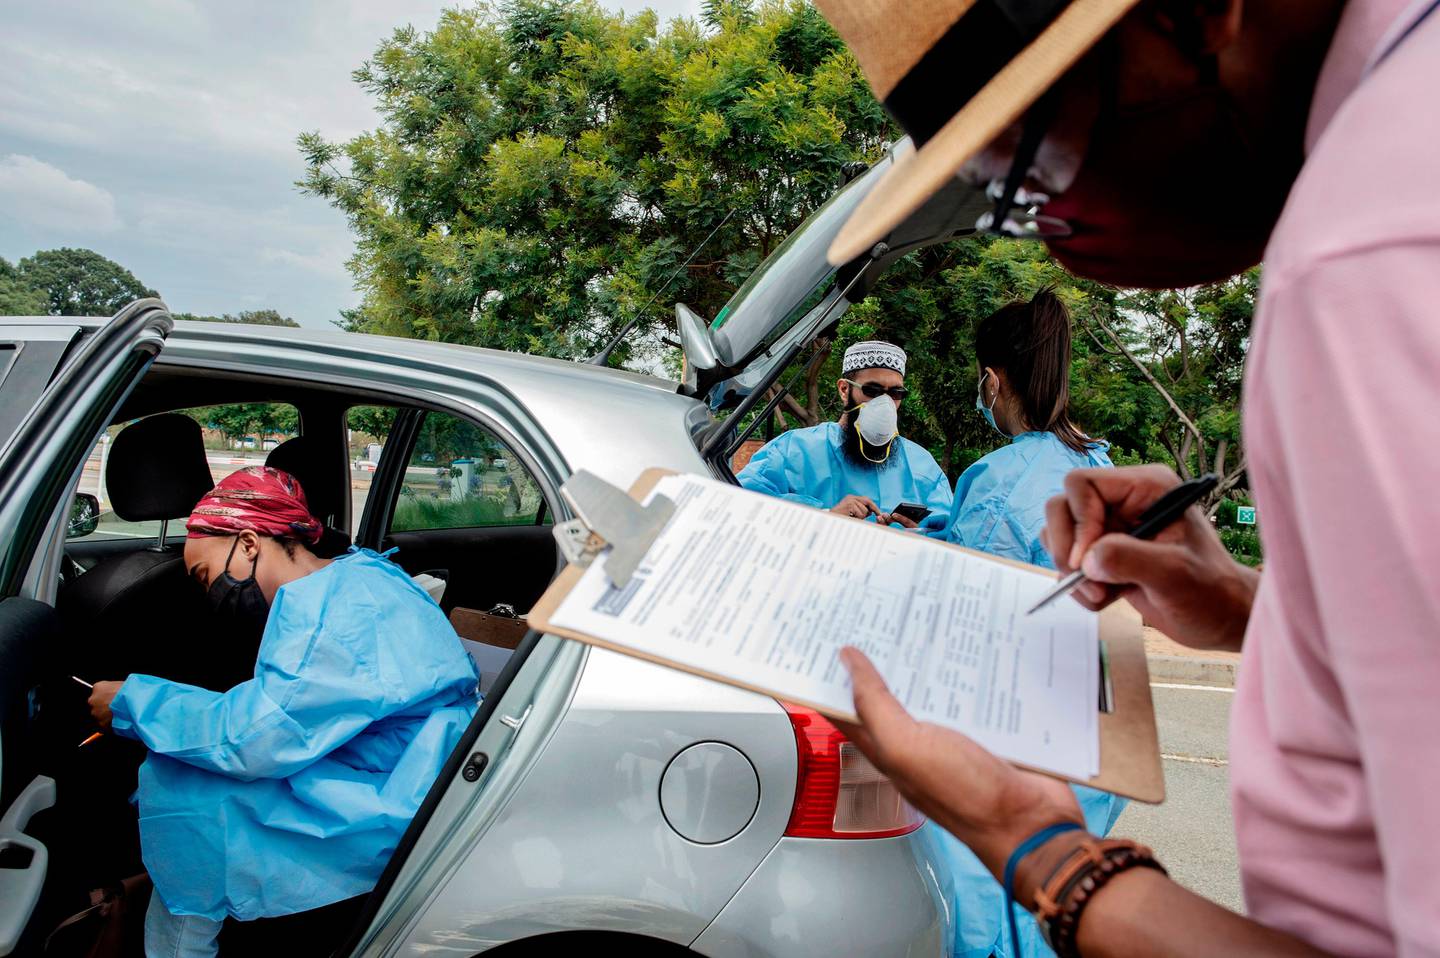 A patient (R) fills out a form before being tested by Lab Technician from the Mullah Laboratories during a drive through COVID-19 swab test campaign at the testing spot at the Flower Hall parking, at Wits University, Braamfontein, Johannesburg, on January 5, 2021. (Photo by Luca Sola / AFP)